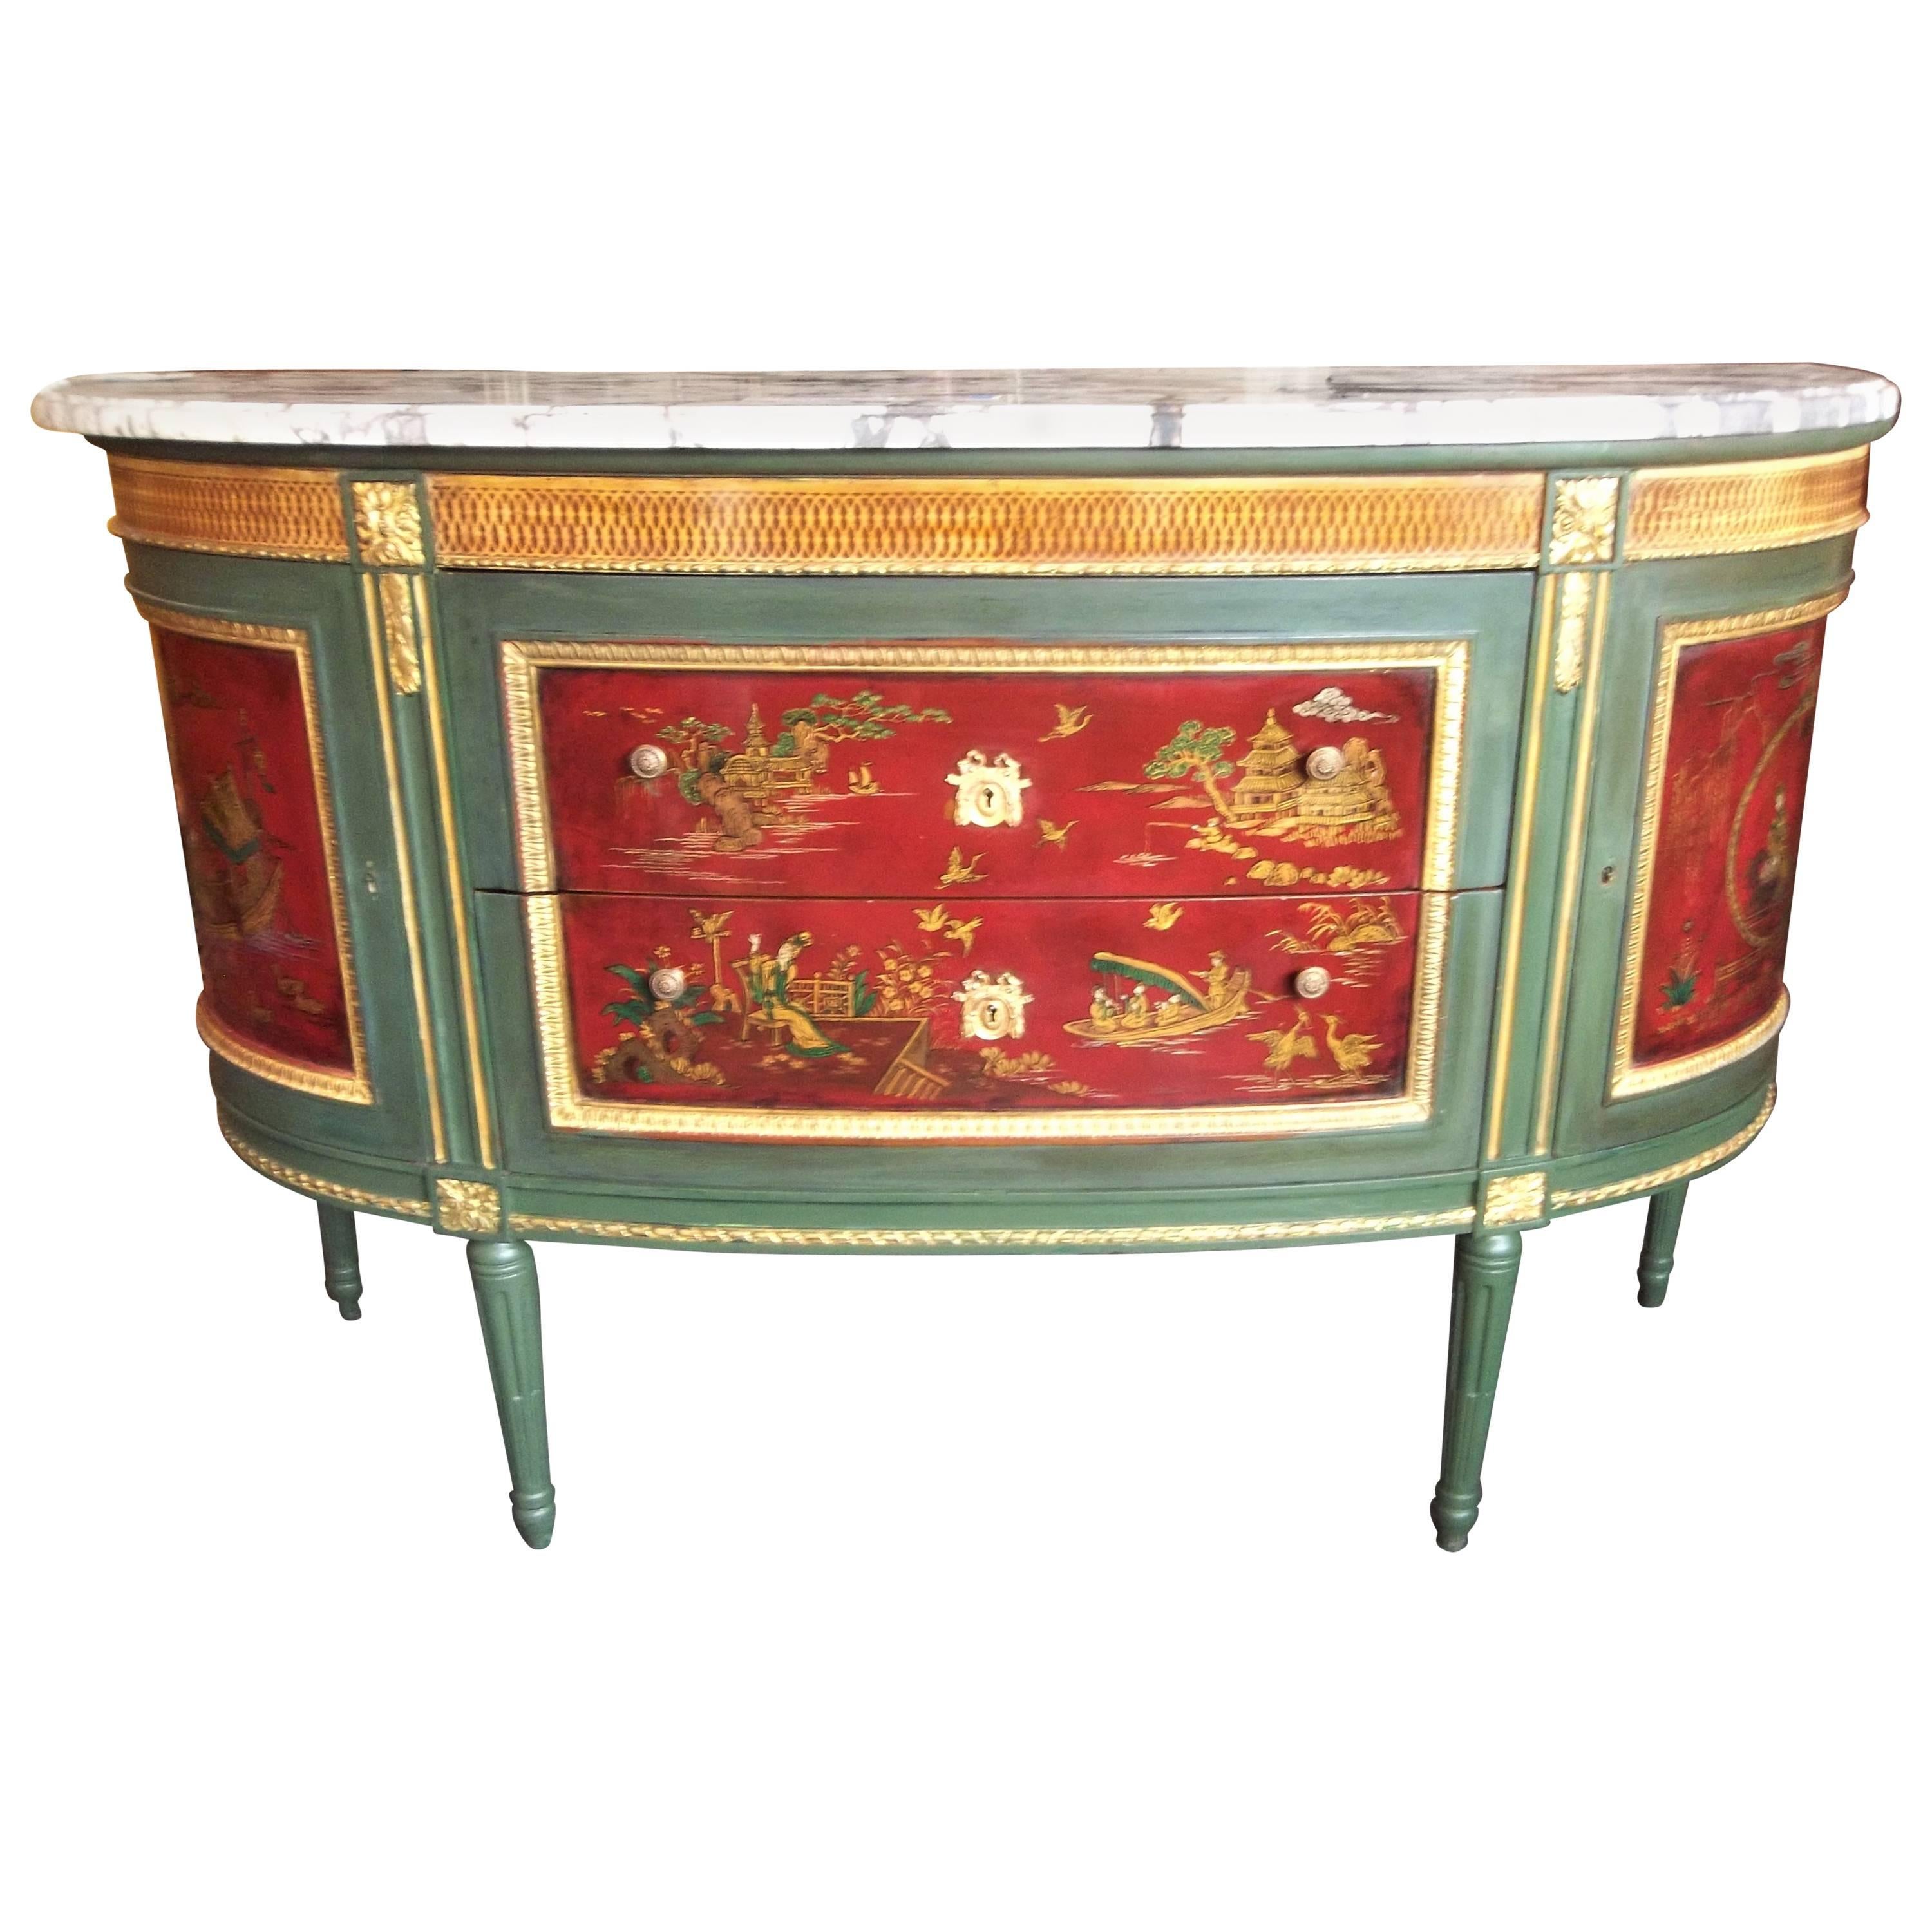 French Green Painted Console Dessert with Chinoiserie Panels